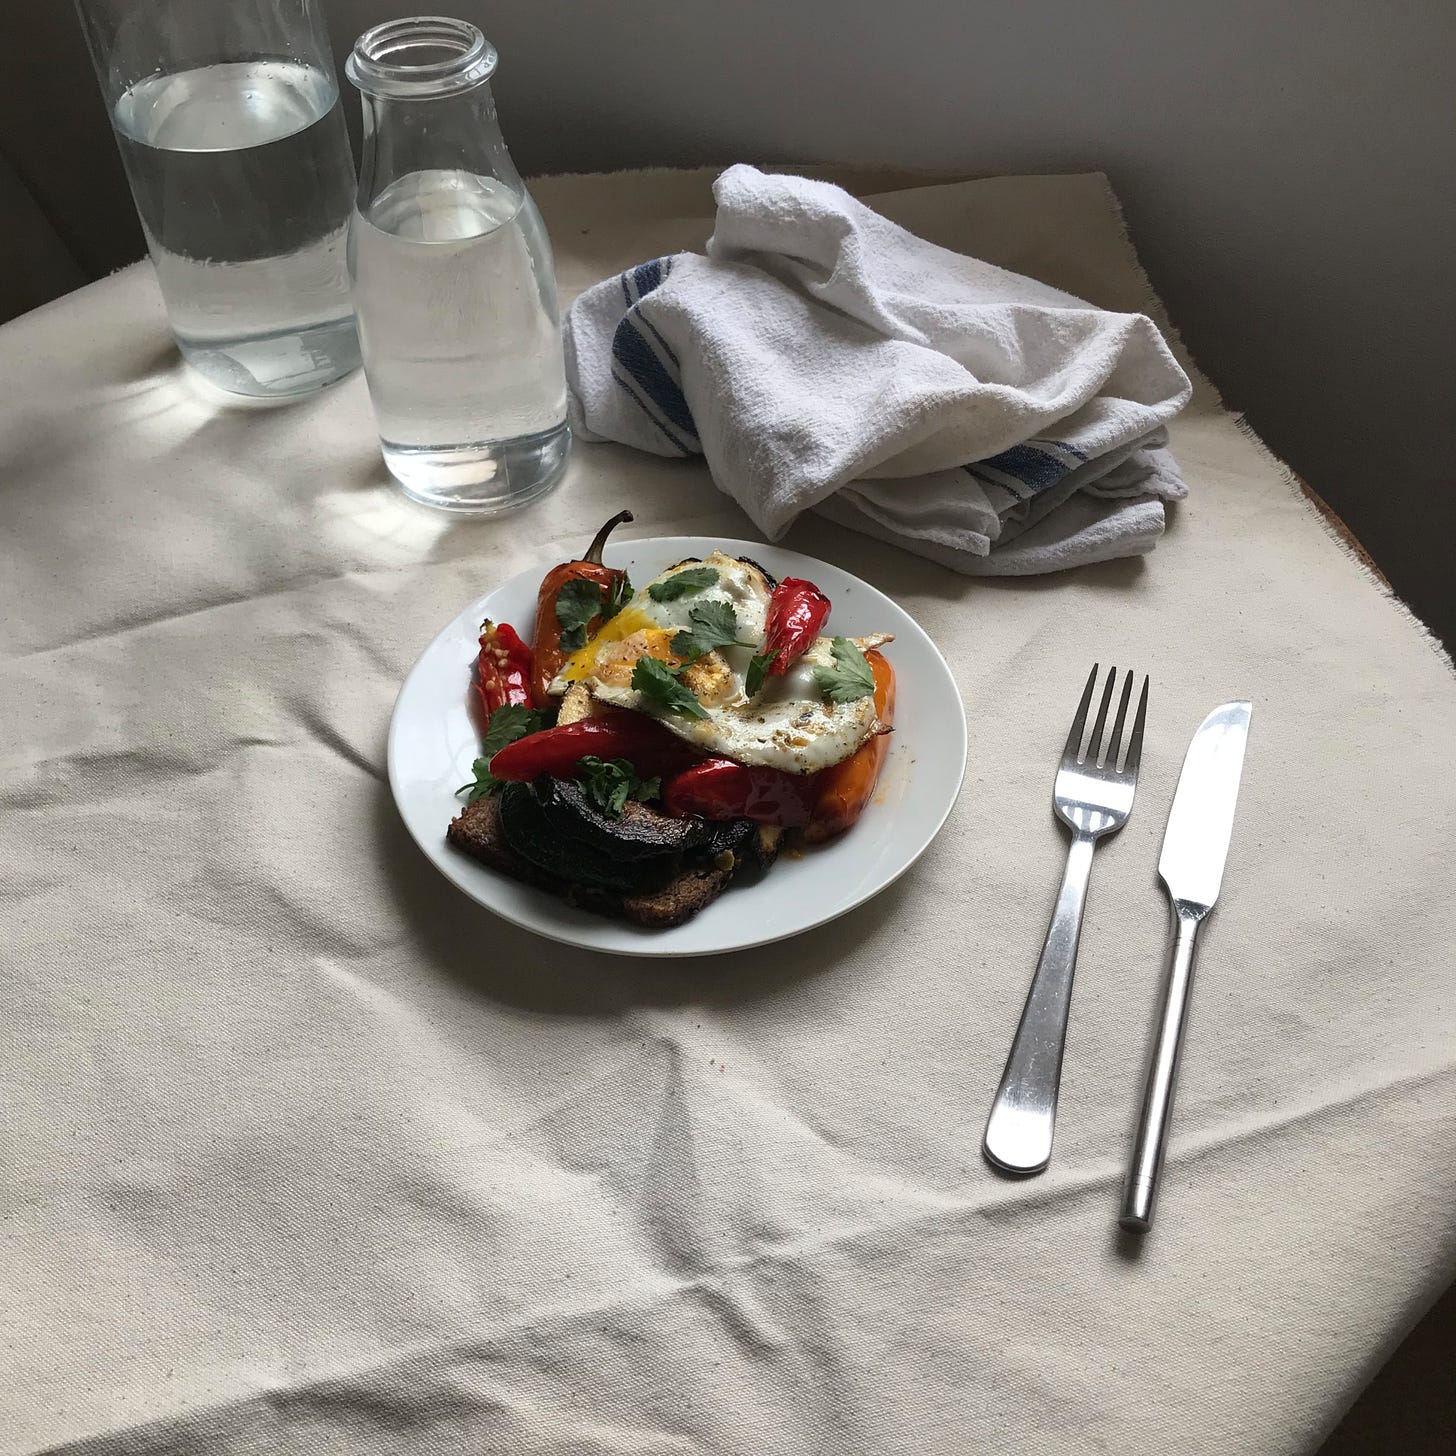 A white plate of food set on a table with cutlery, a jumbled kitchen towel, two glass carafe of water. On the plate, in the centre, mounded up, some dark brown bread topped with soft fried eggs and some small long red peppers, a green herb too. 